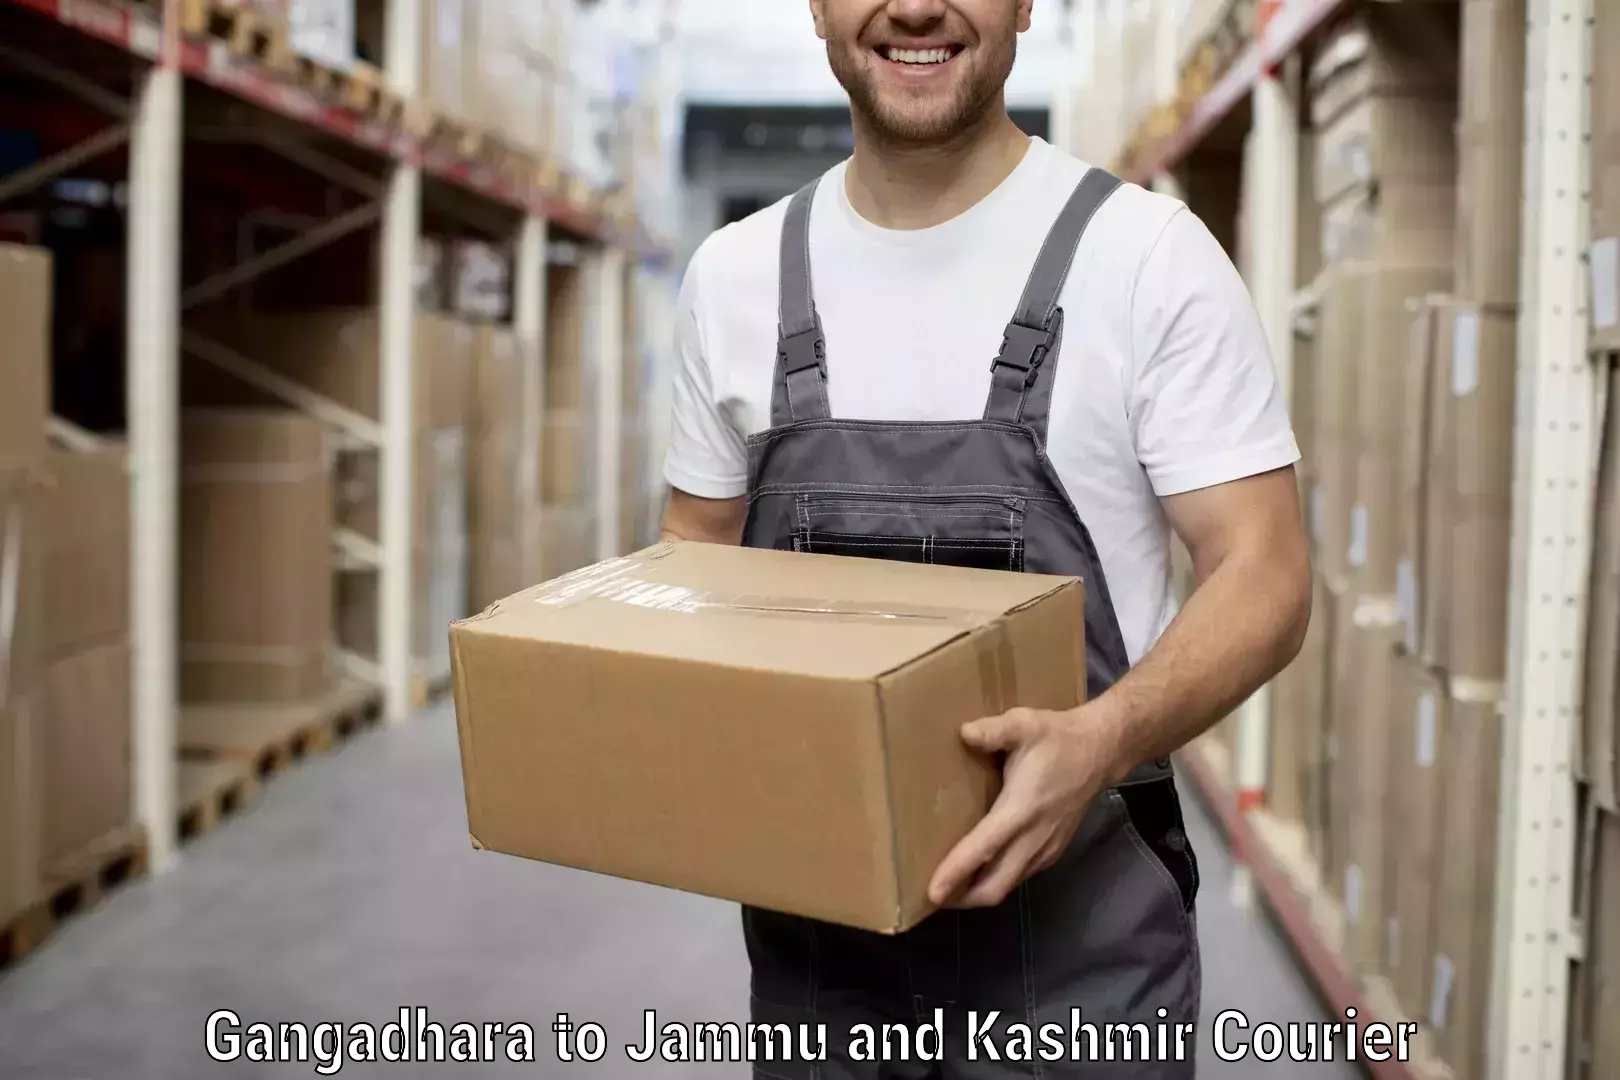 Trusted relocation services in Gangadhara to Srinagar Kashmir